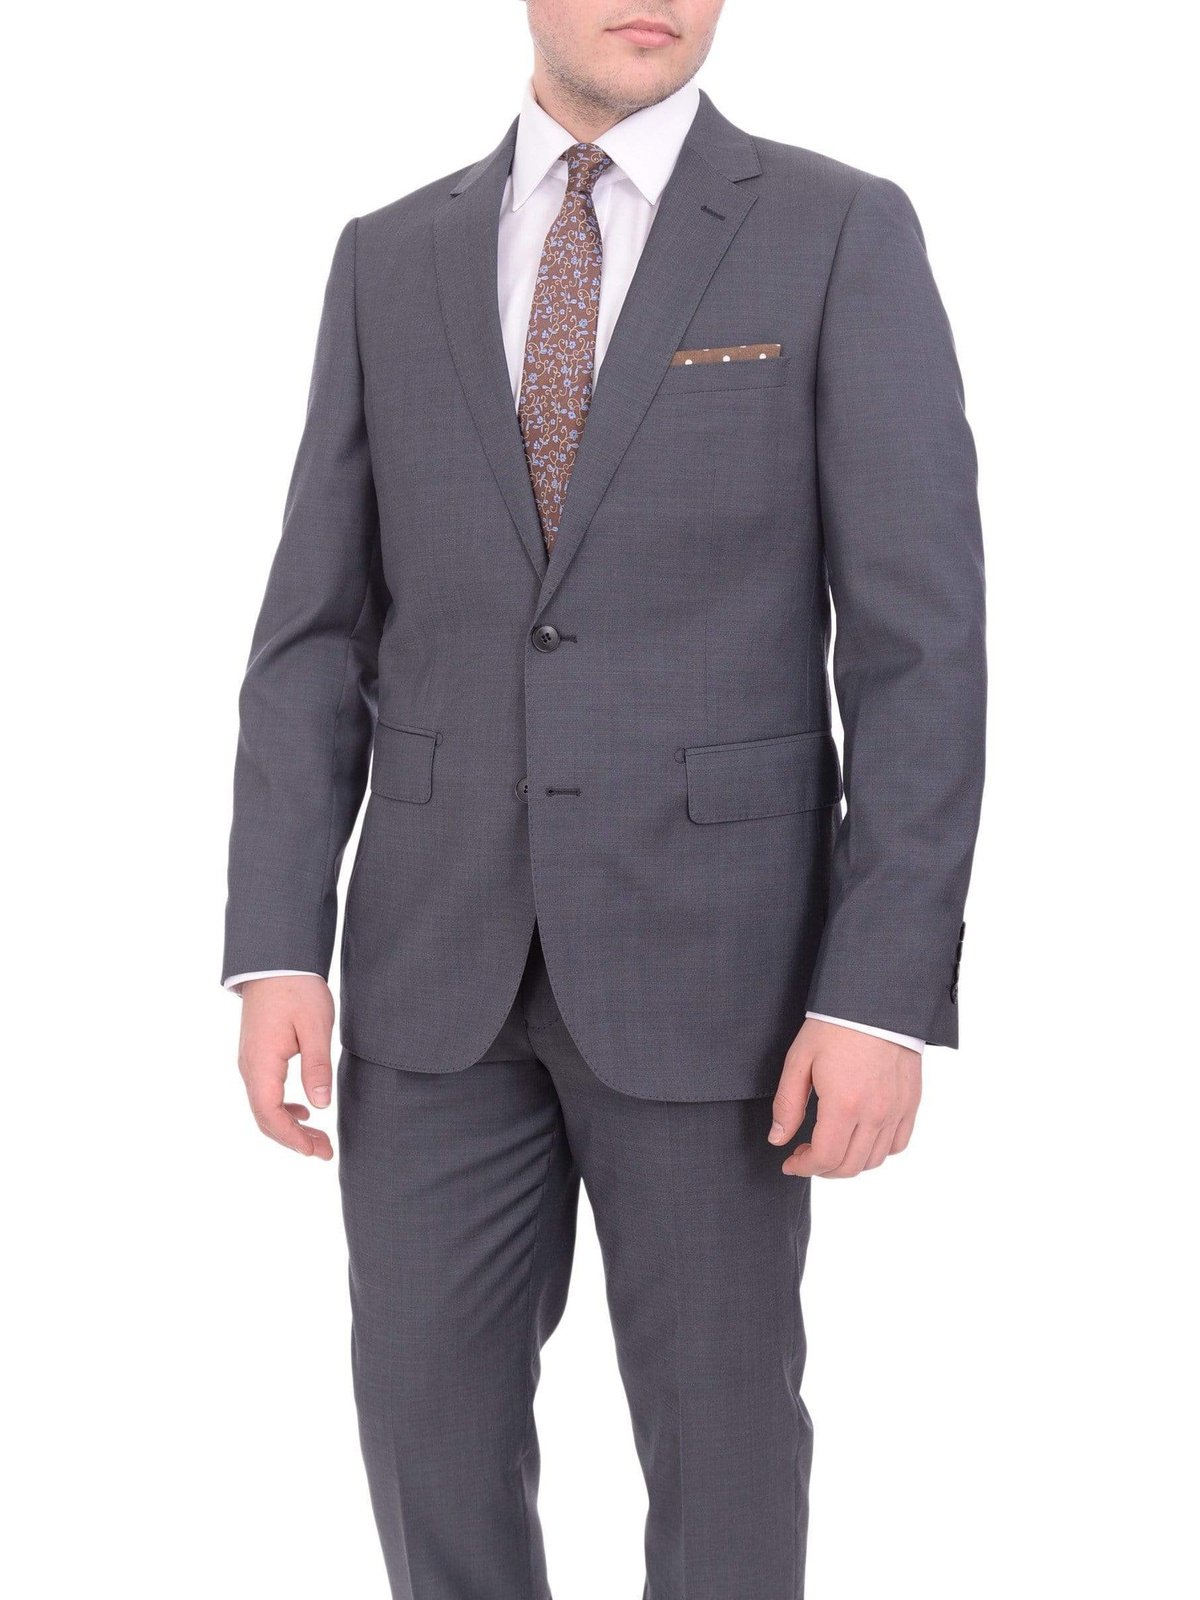 Label M TWO PIECE SUITS 36R Mens Extra Slim Fit Heather Gray Blue Textured Two Button Wool Blend Suit